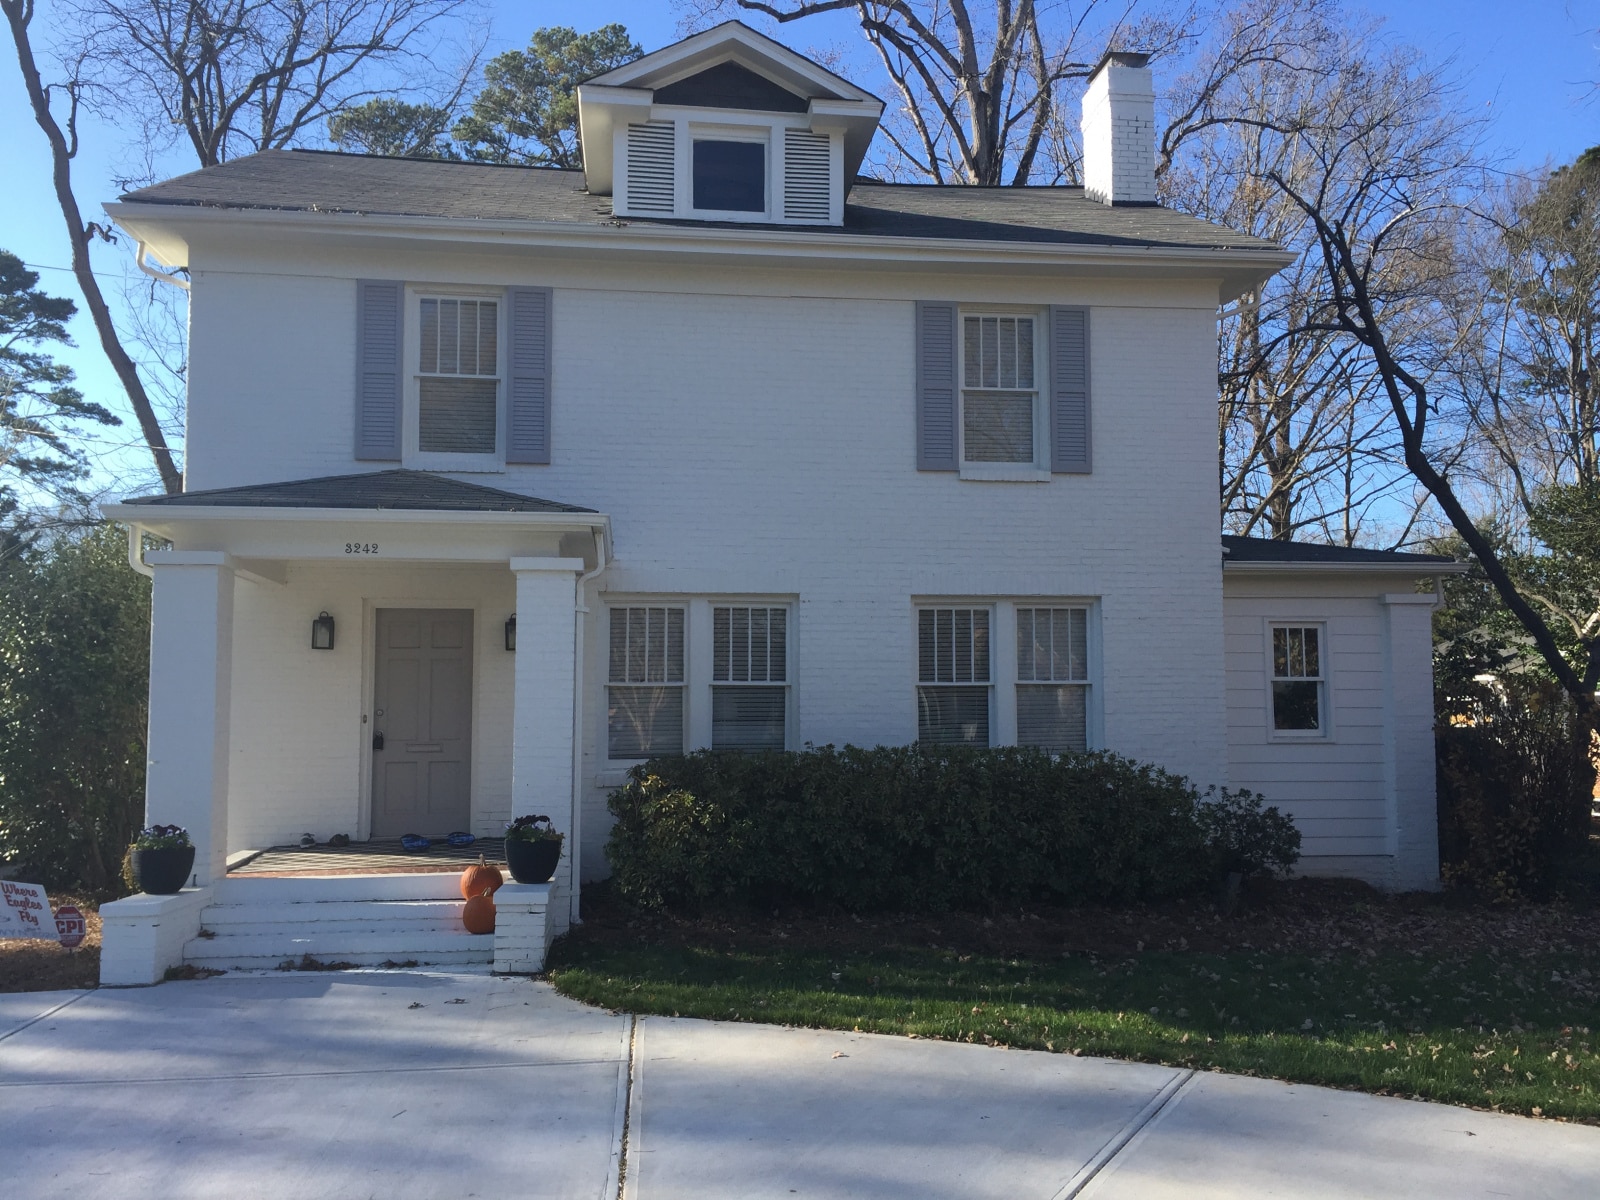 Fixed Louvered Shutters in Uptown Charlotte, NC